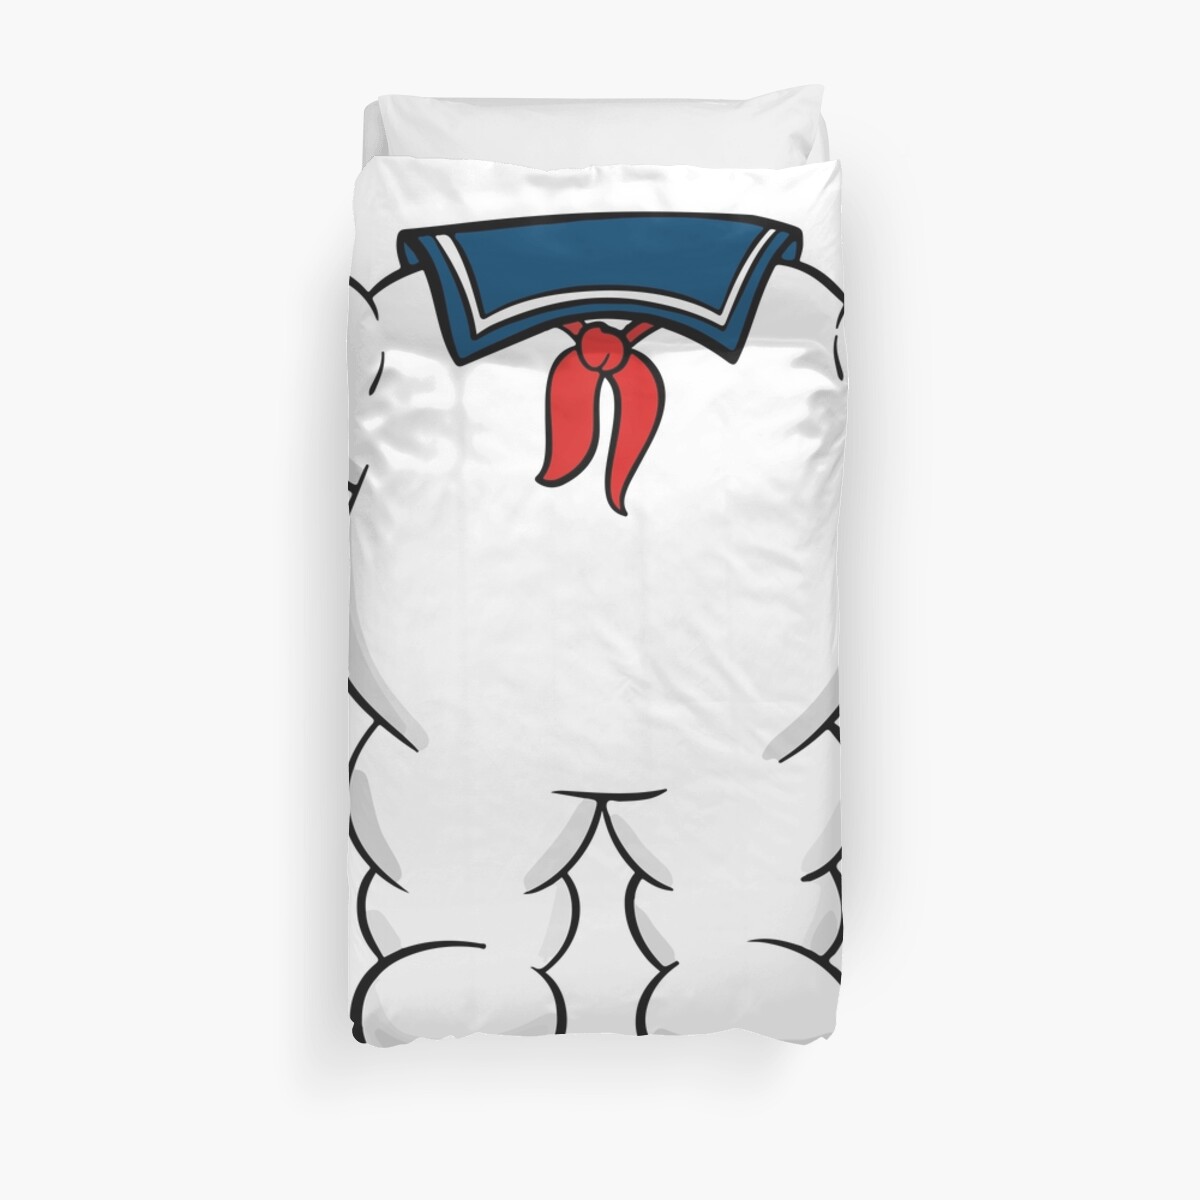 Stay Puft Marshmallow Man Body Duvet Cover By Imlying Redbubble